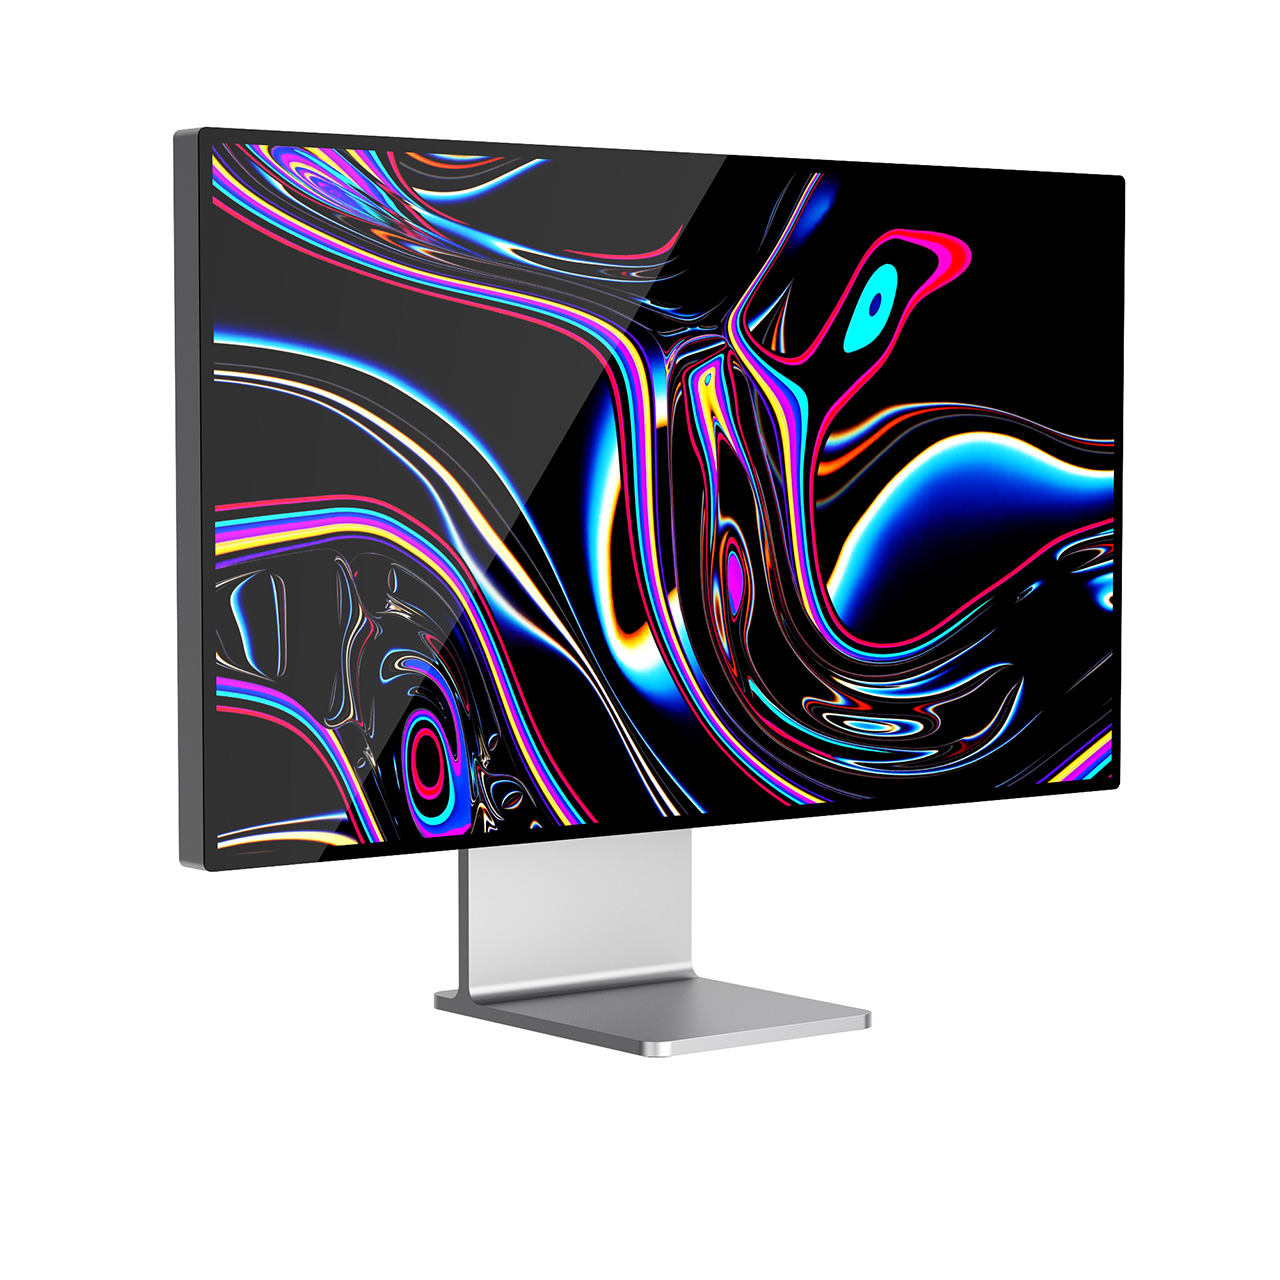 pro-display-xdr-monitor-by-apple.jpg